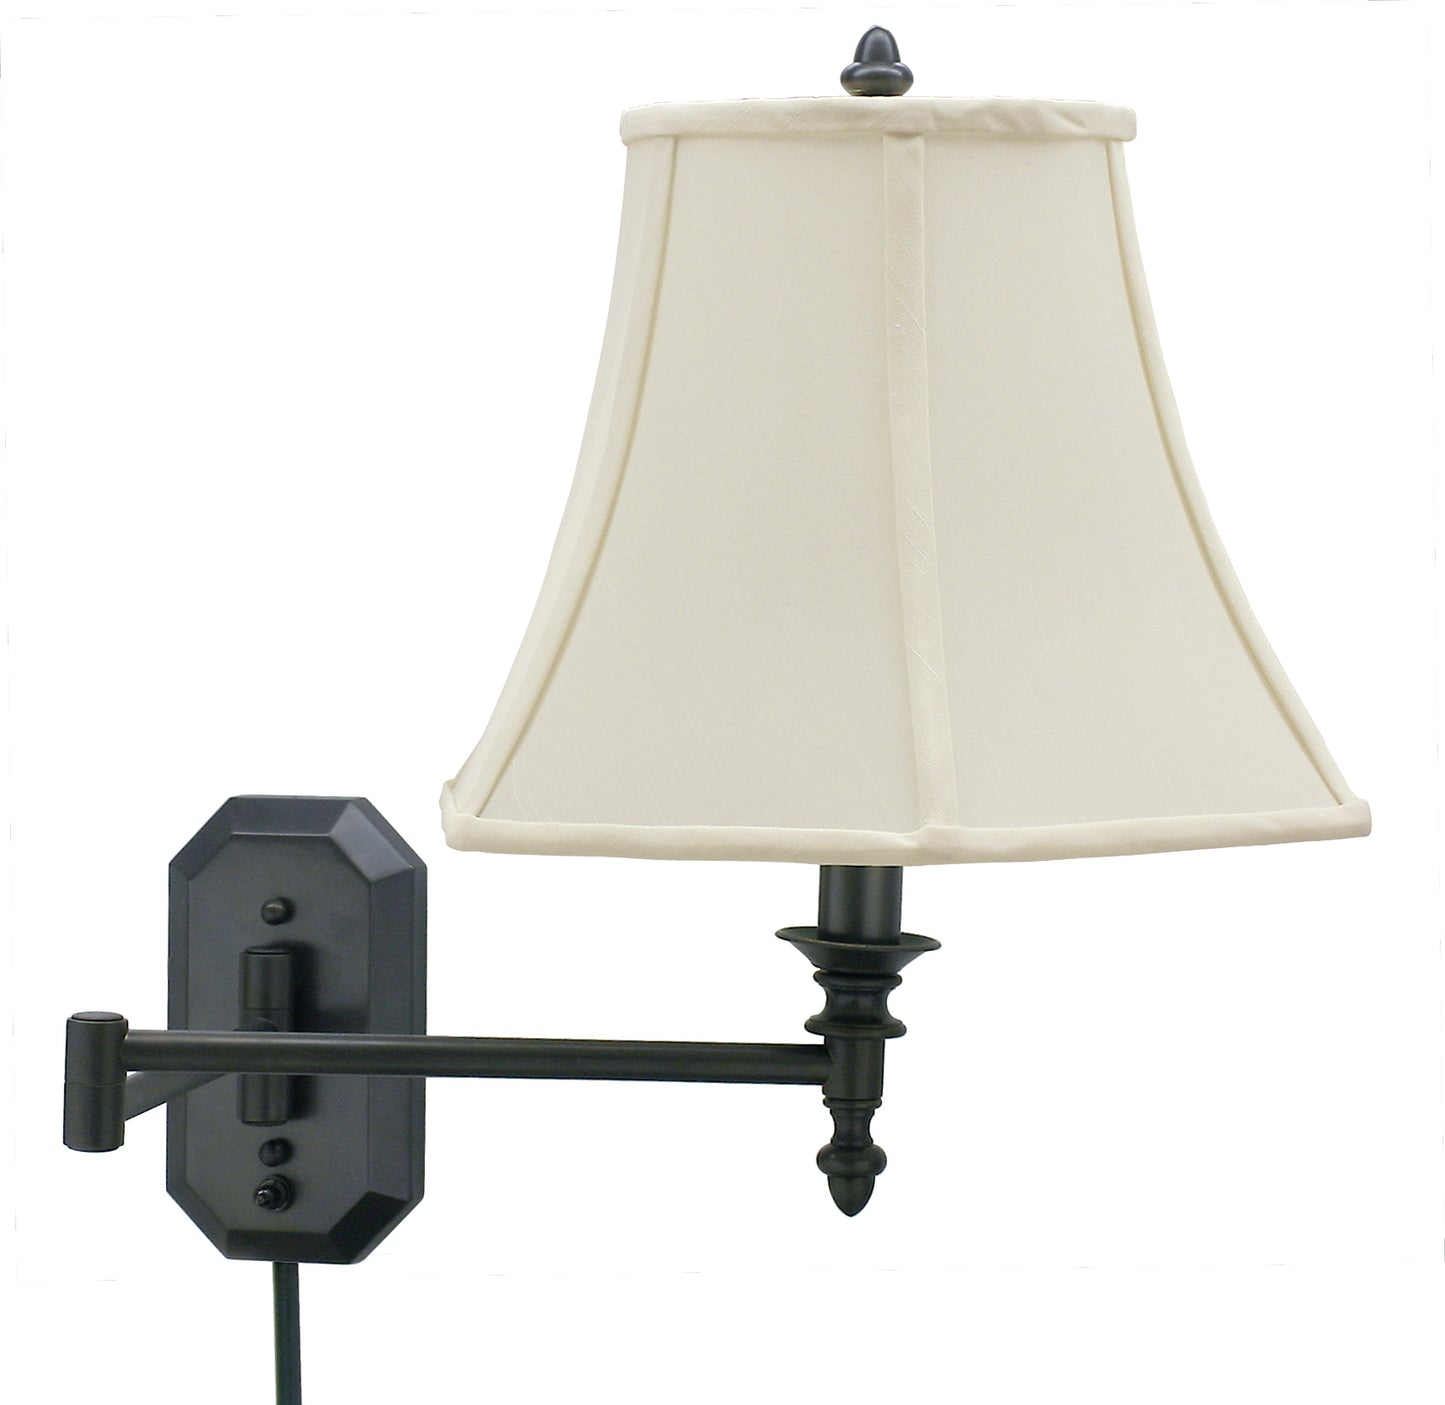 House of Troy Wall Swing Arm Lamp in Oil Rubbed Bronze WS-708-OB